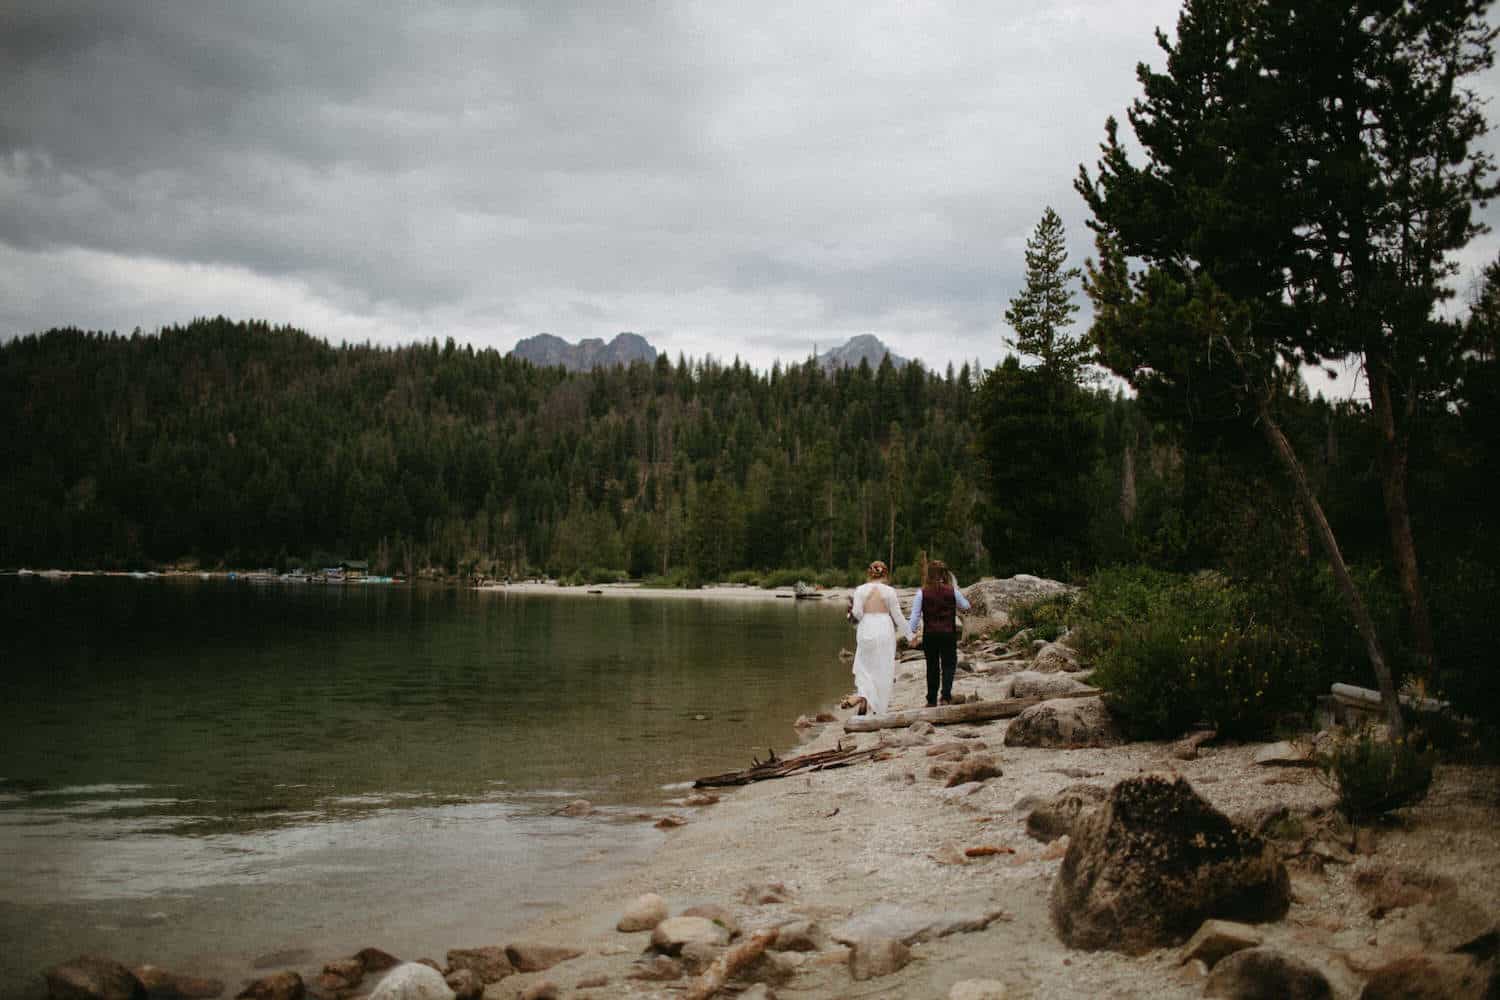 Idaho Redfish Lake Elopement Caitlin and Brandon's Wedding Christine Marie Photography Simply Eloped 5